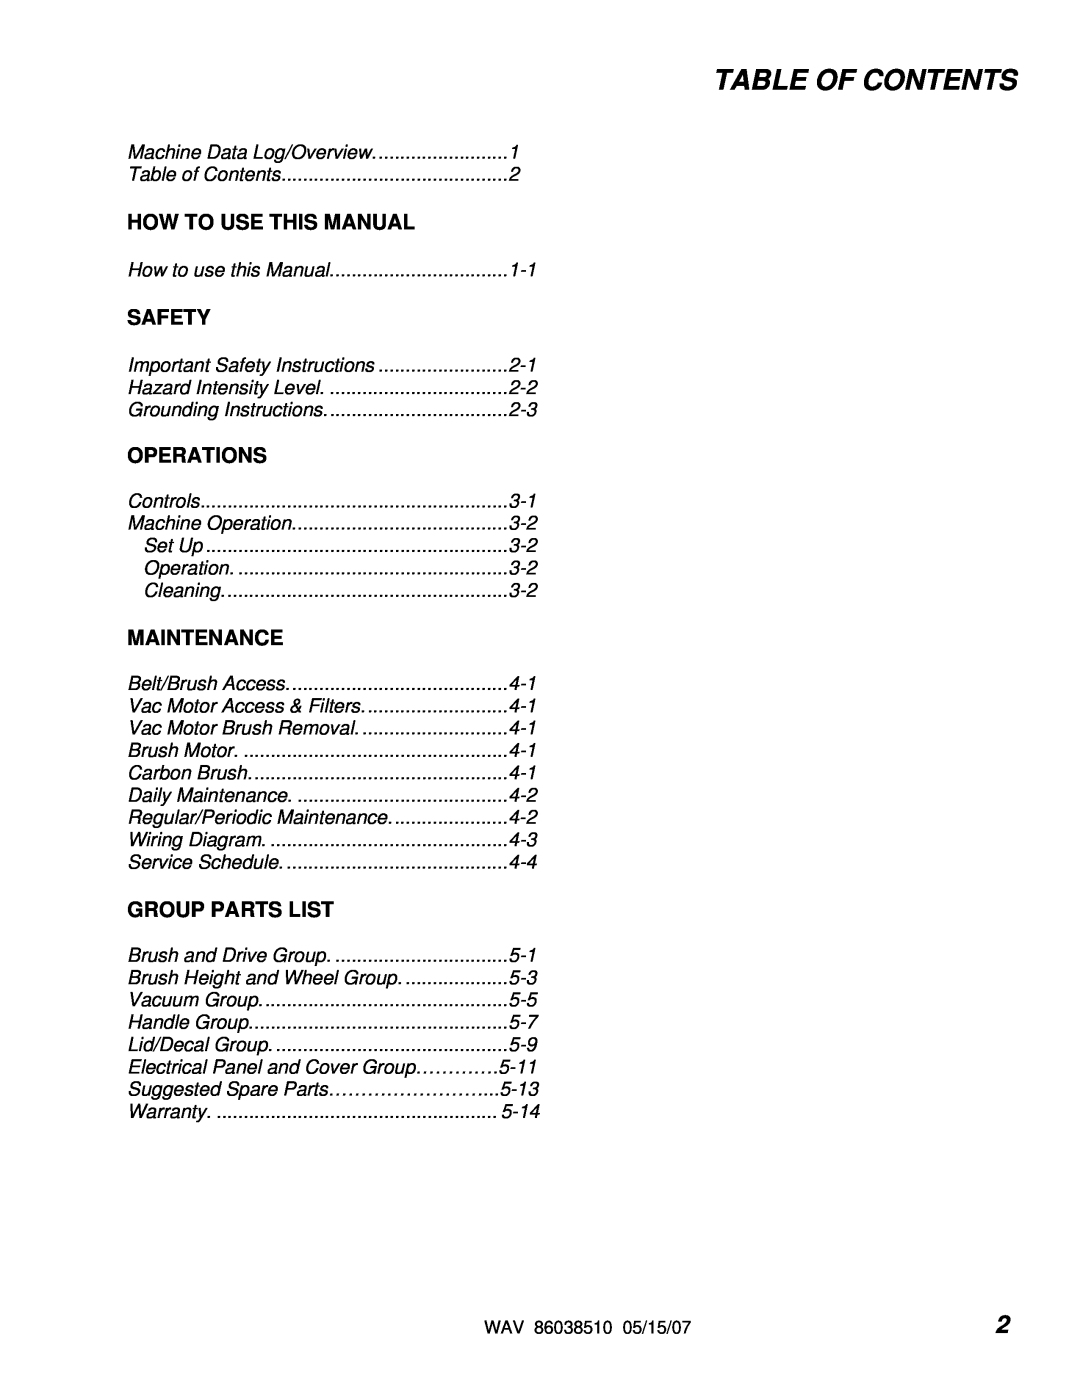 Windsor WAV 10125050 Table Of Contents, How To Use This Manual, Safety, Operations, Maintenance, Group Parts List 